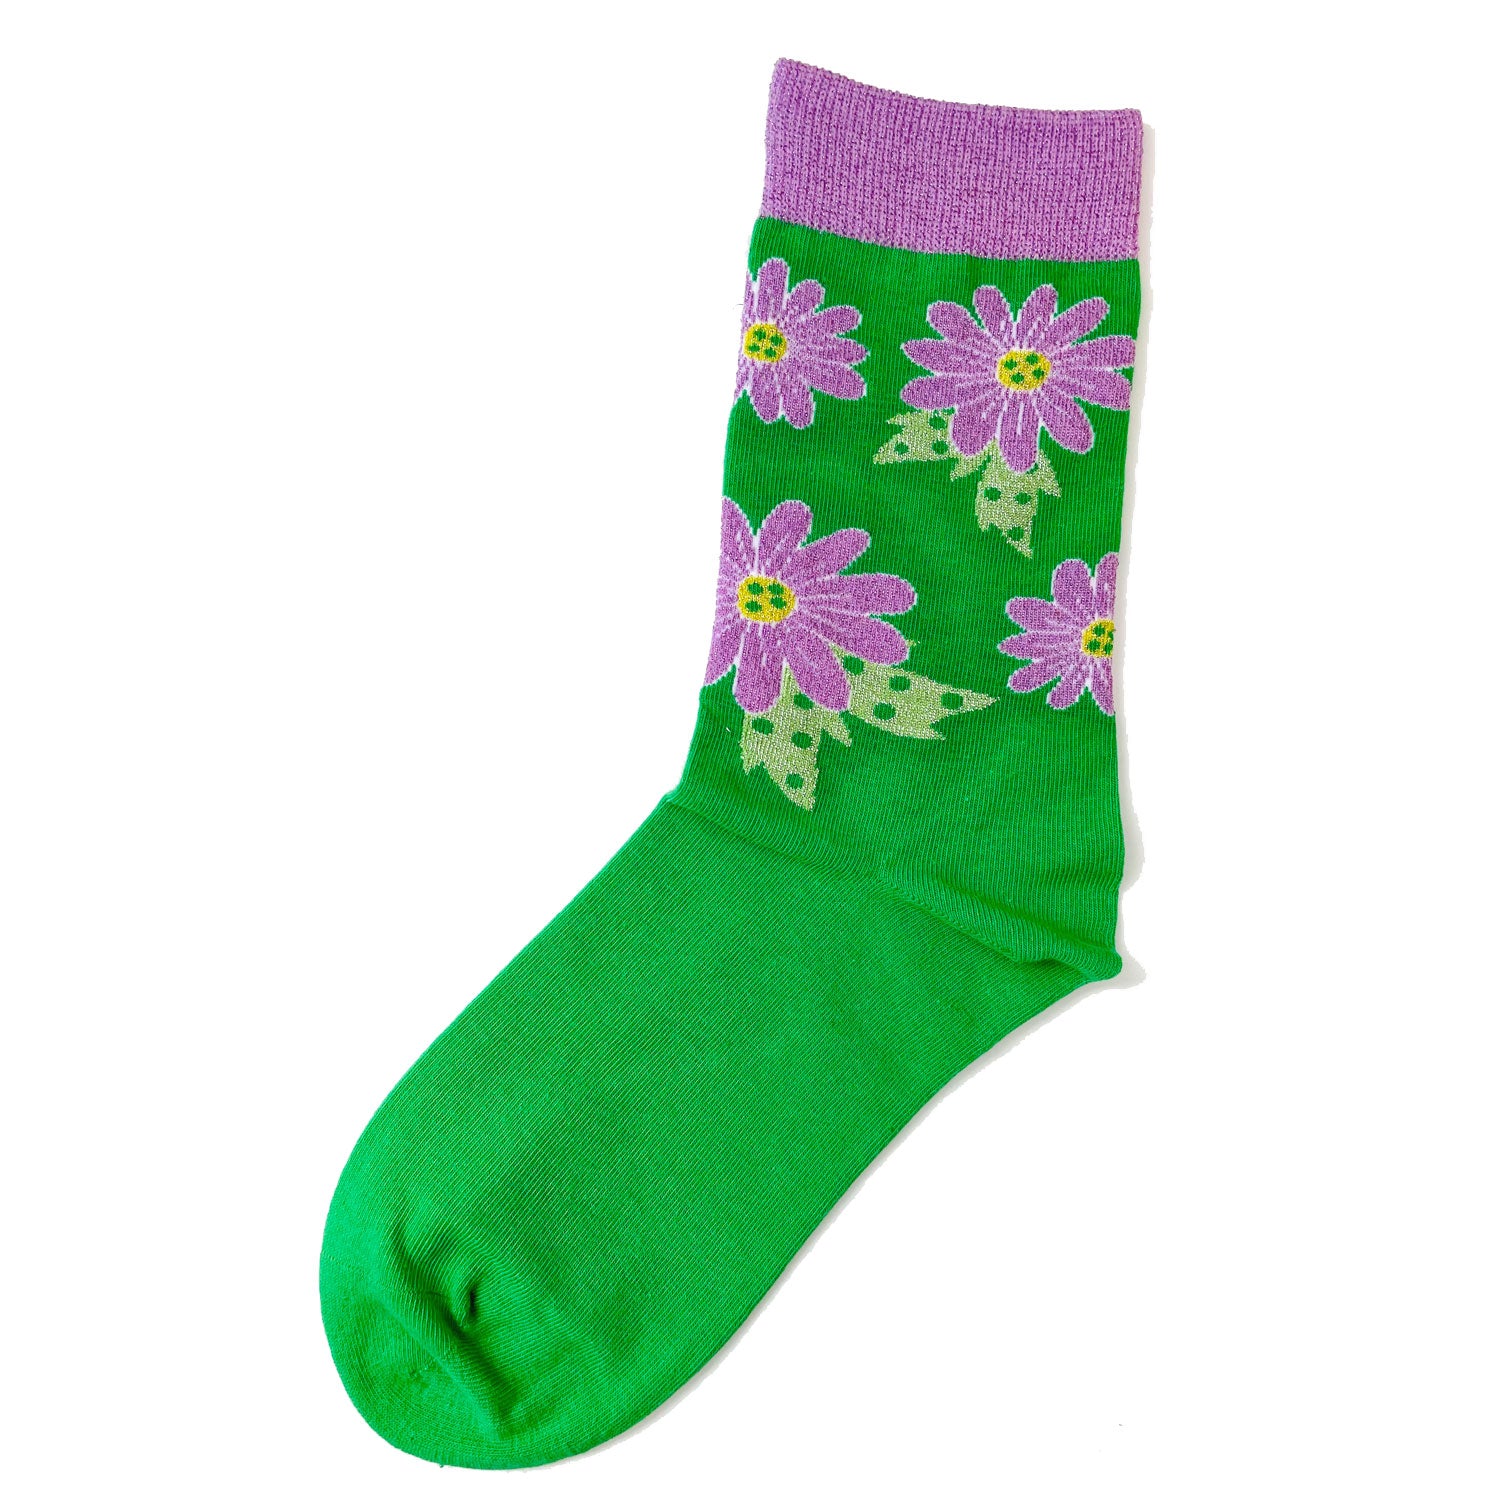 Green sock with purple flowers in cotton with mettalic yarn details